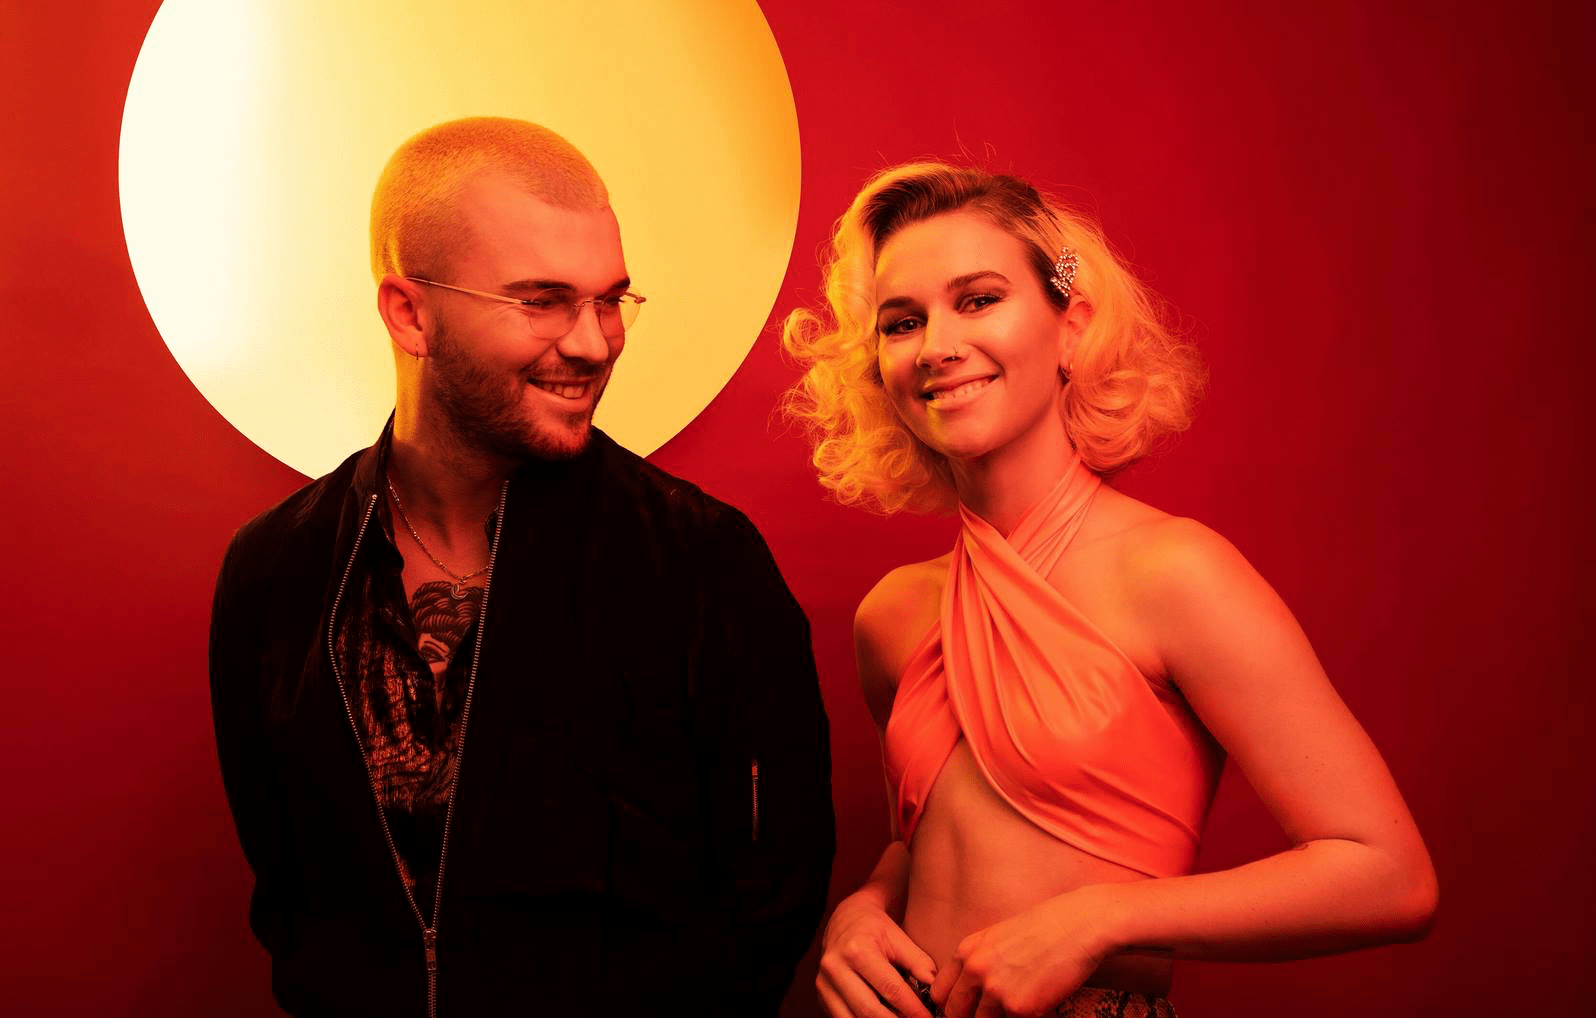 The duo, Broods, smiling and lit by orange hues.